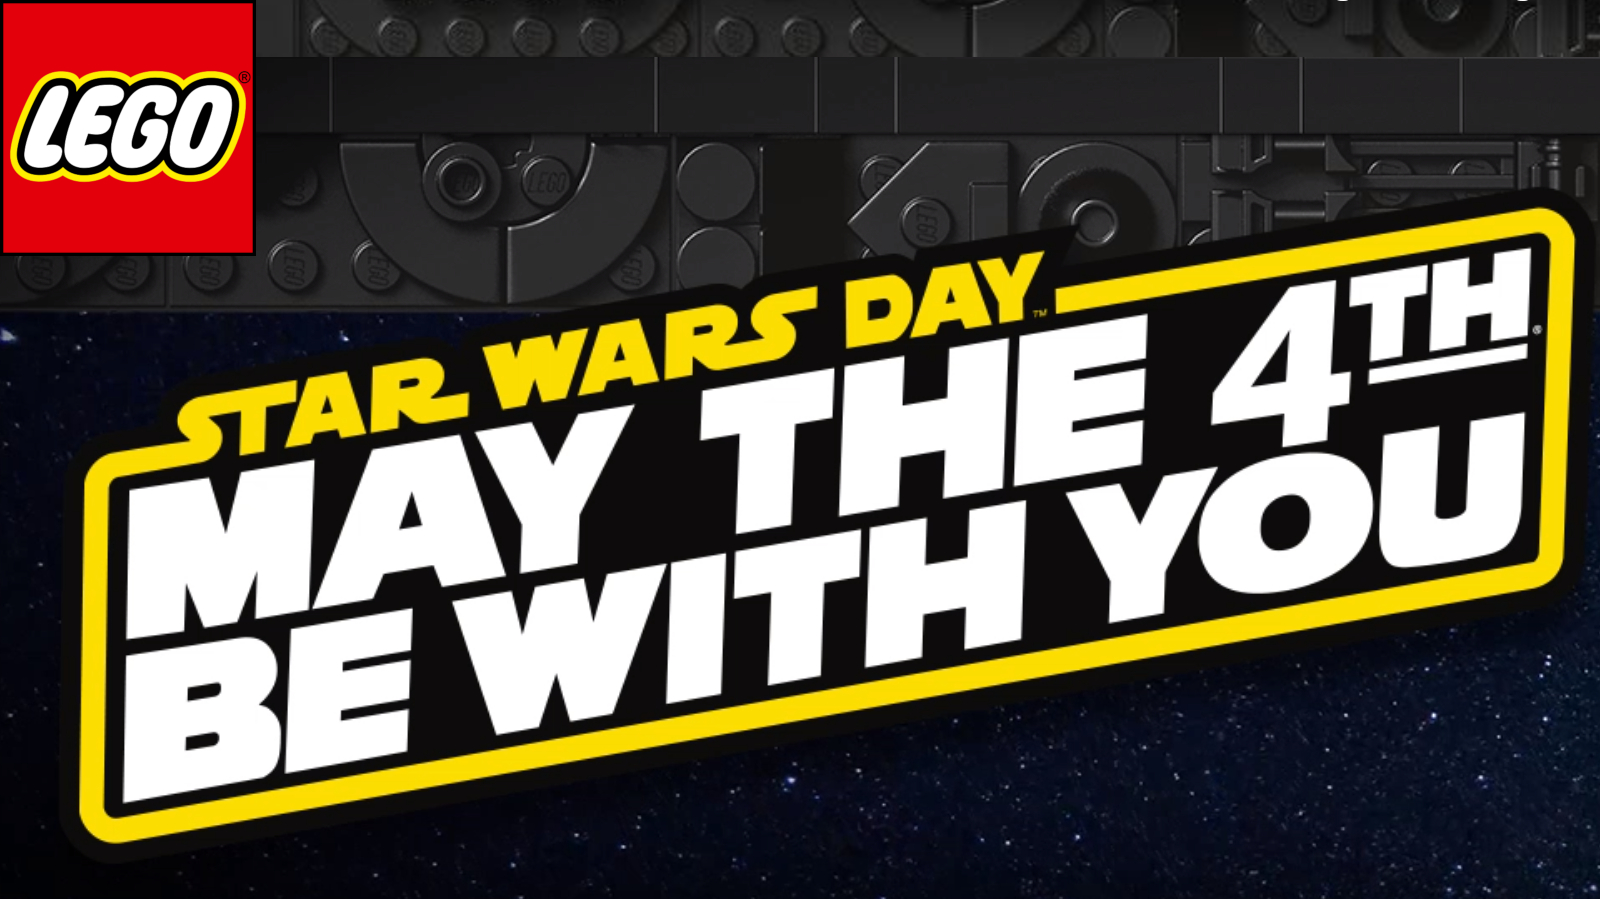 May the deals be with you in the Lego Star Wars Day 2024 sale